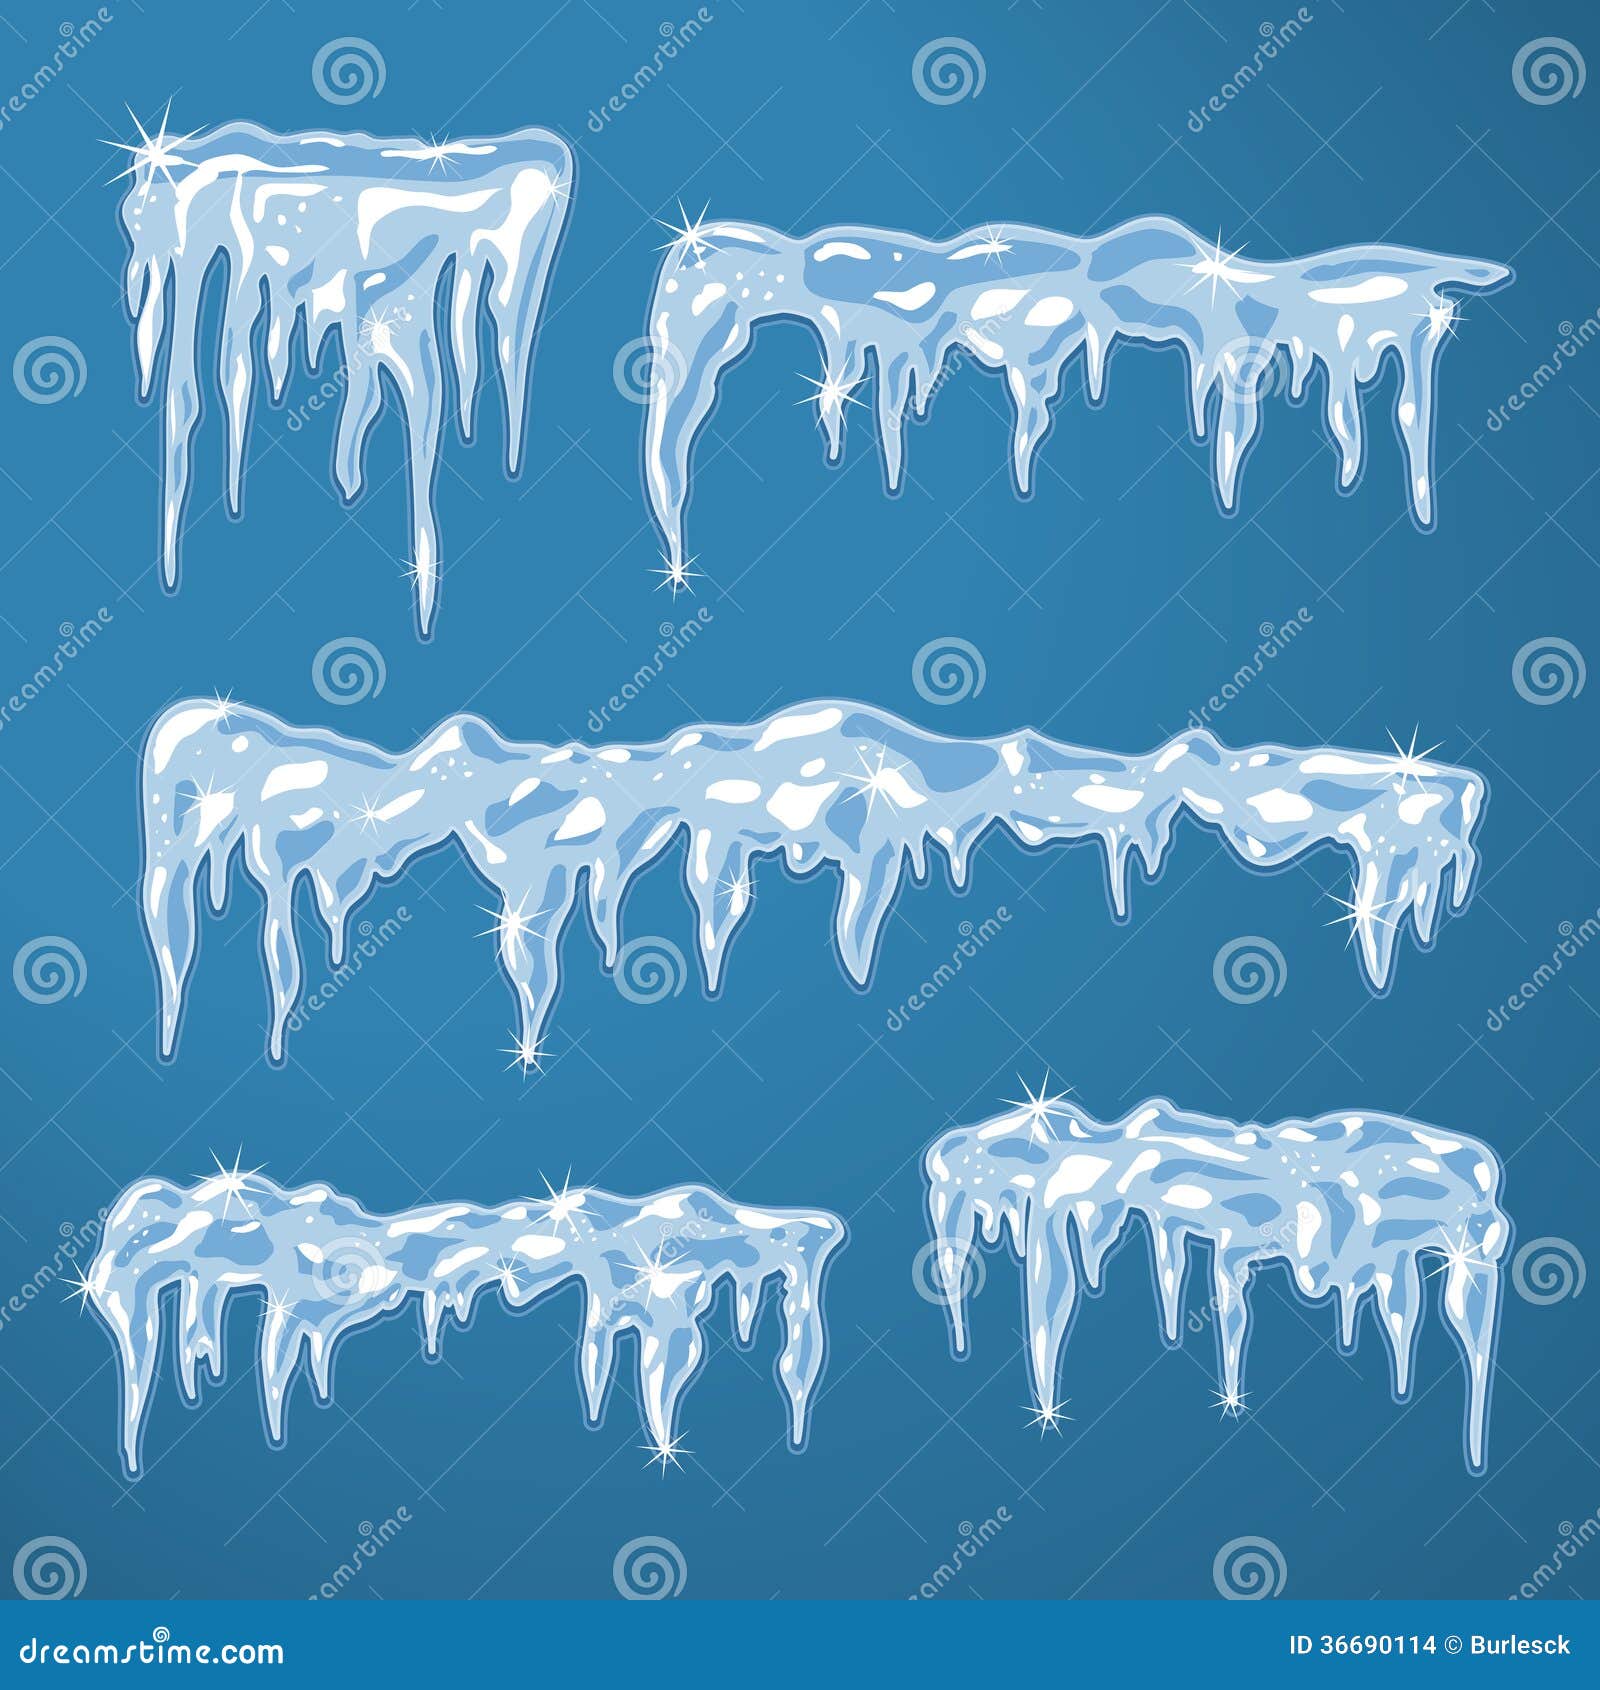 ice sheets with icicles